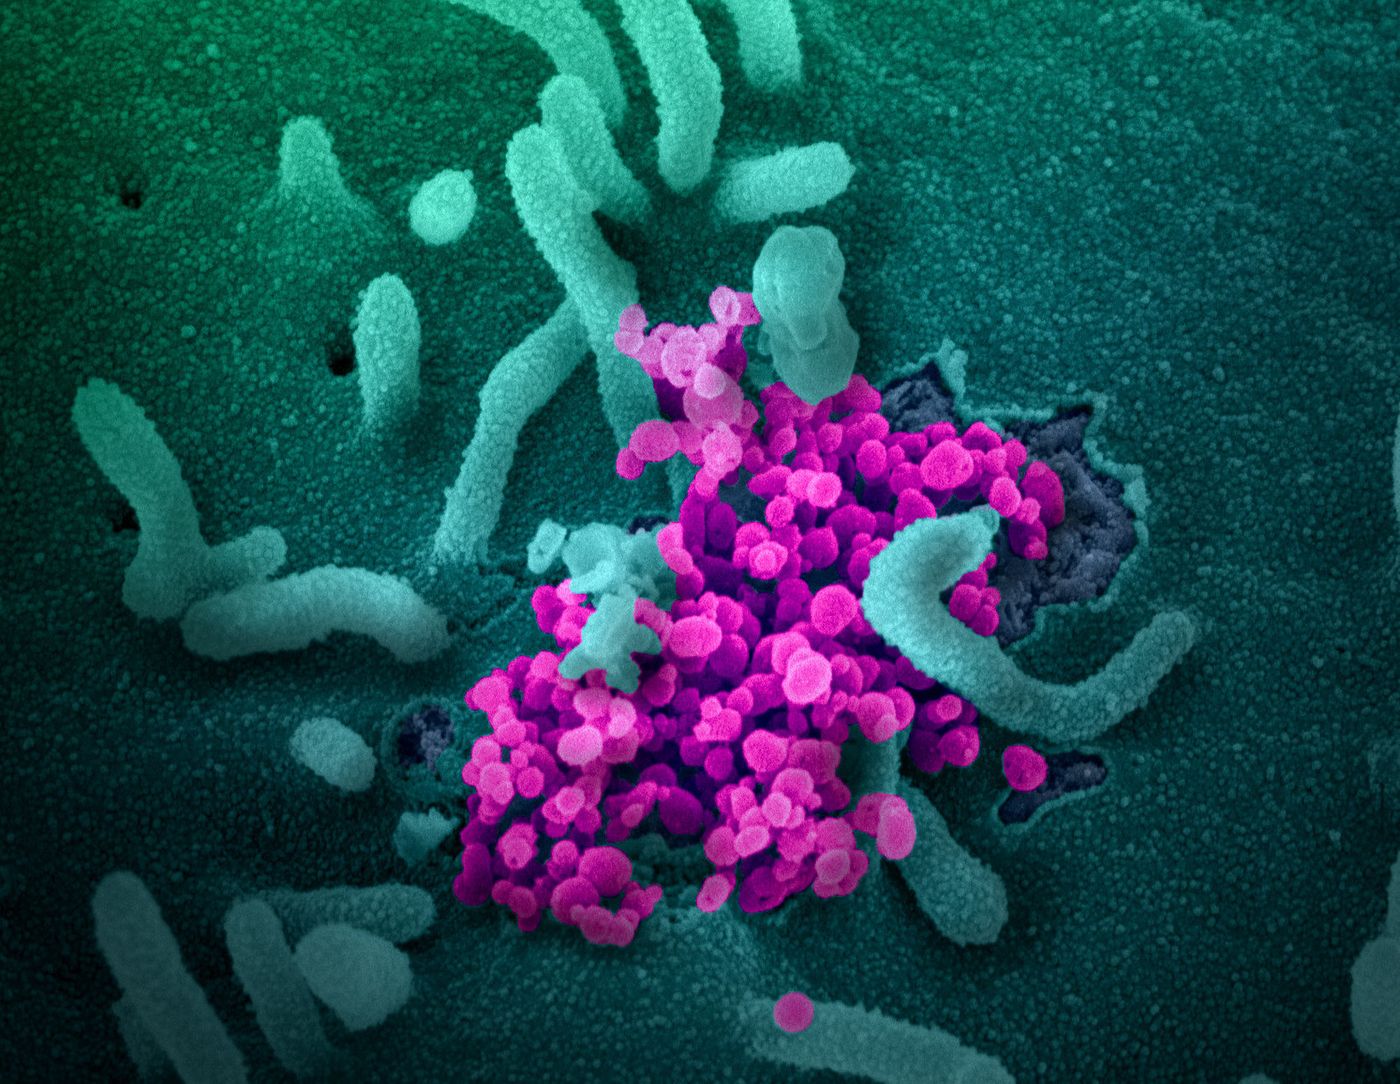 This scanning electron microscope image shows SARS-CoV-2 (round magenta objects) emerging from the surface of cells cultured in the lab. SARS-CoV-2, also known as 2019-nCoV, is the virus that causes COVID-19. The virus shown was isolated from a patient in the U.S. / Credit: NIAID-RML